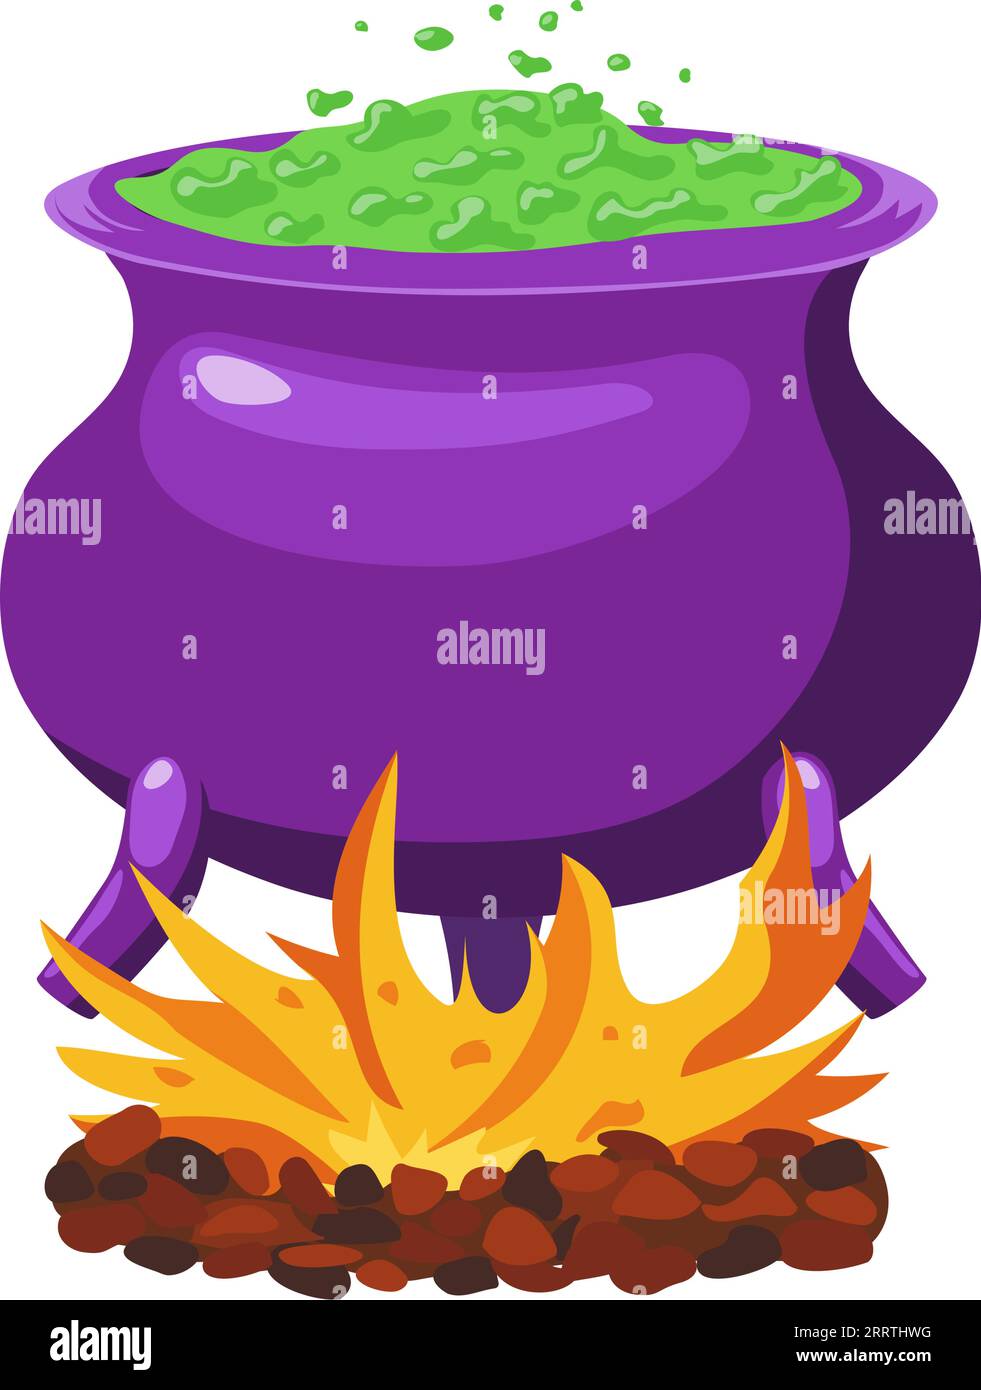 Halloween witch pot with green liquid and fire. Decor for Halloween celebration. Isolated purple cauldron graphic template. Vector illustration. Stock Vector